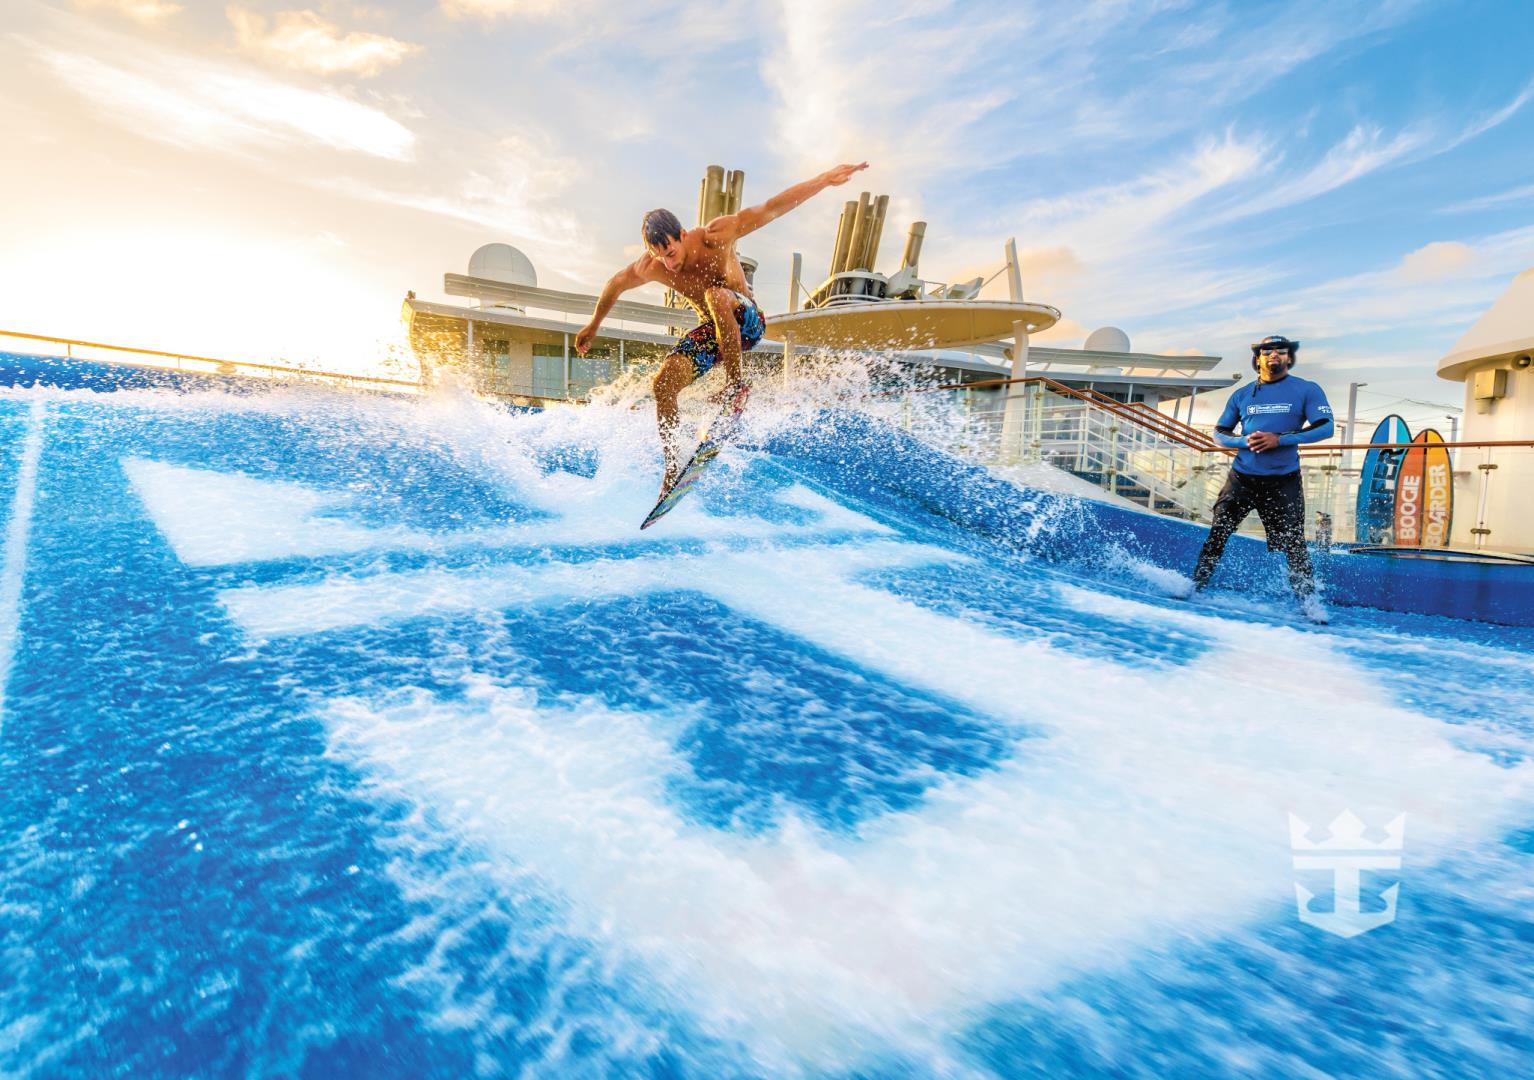 View of man surfing on FlowRider - Photo Credit: S Tremble